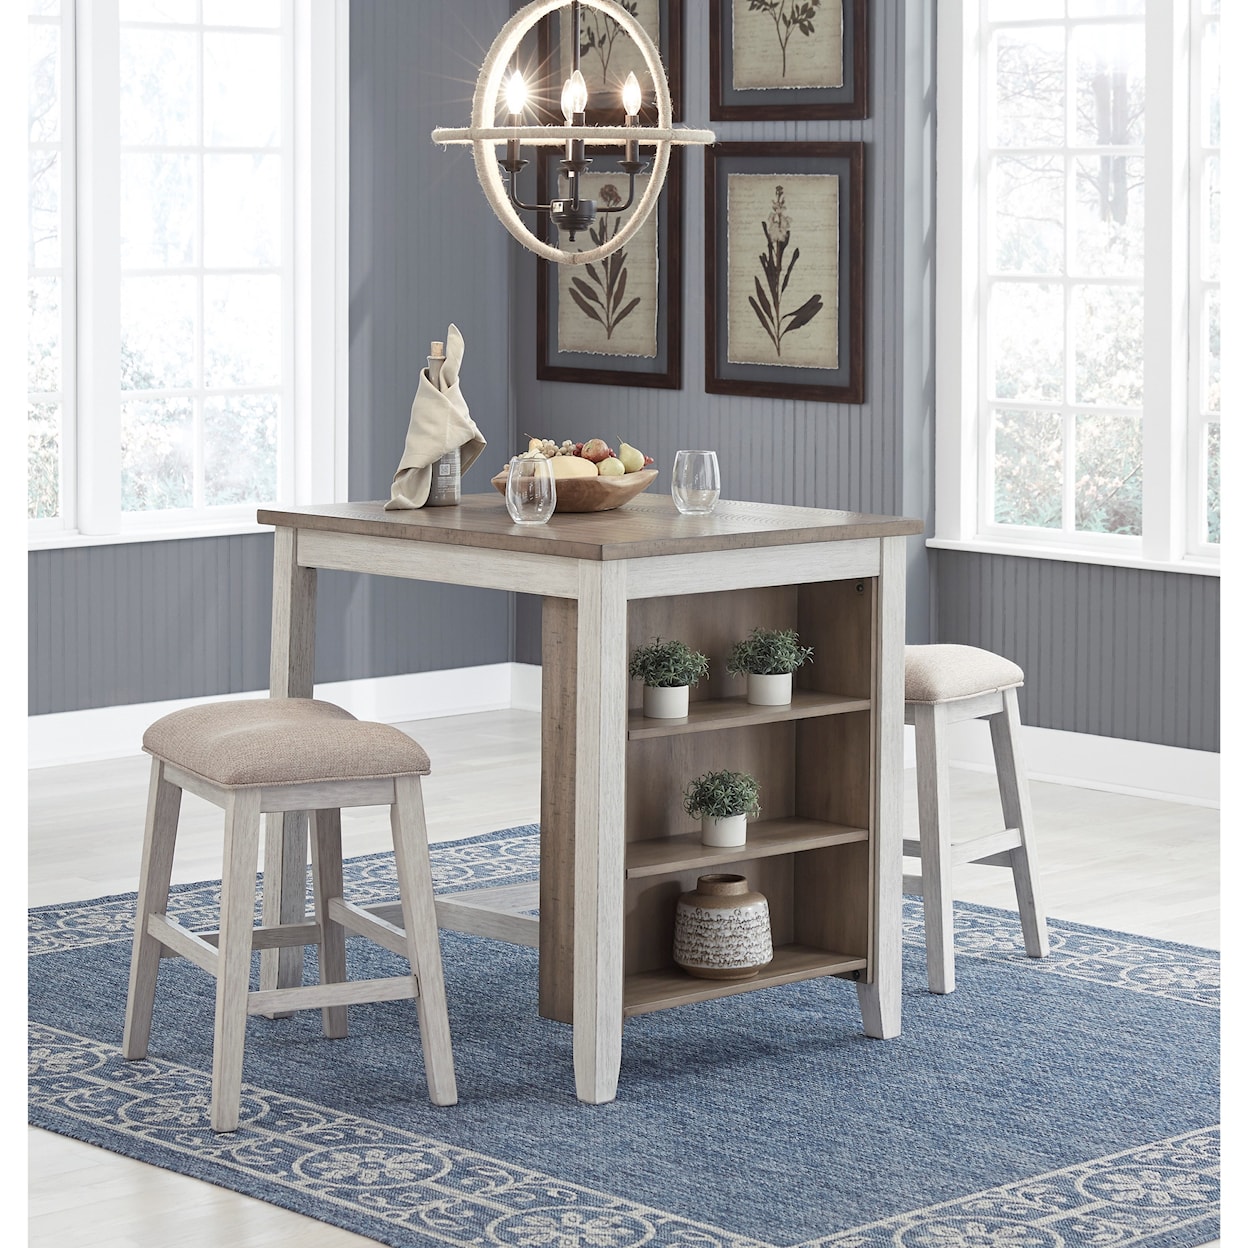 Signature Design by Ashley Skempton 3pc Dining Room Group